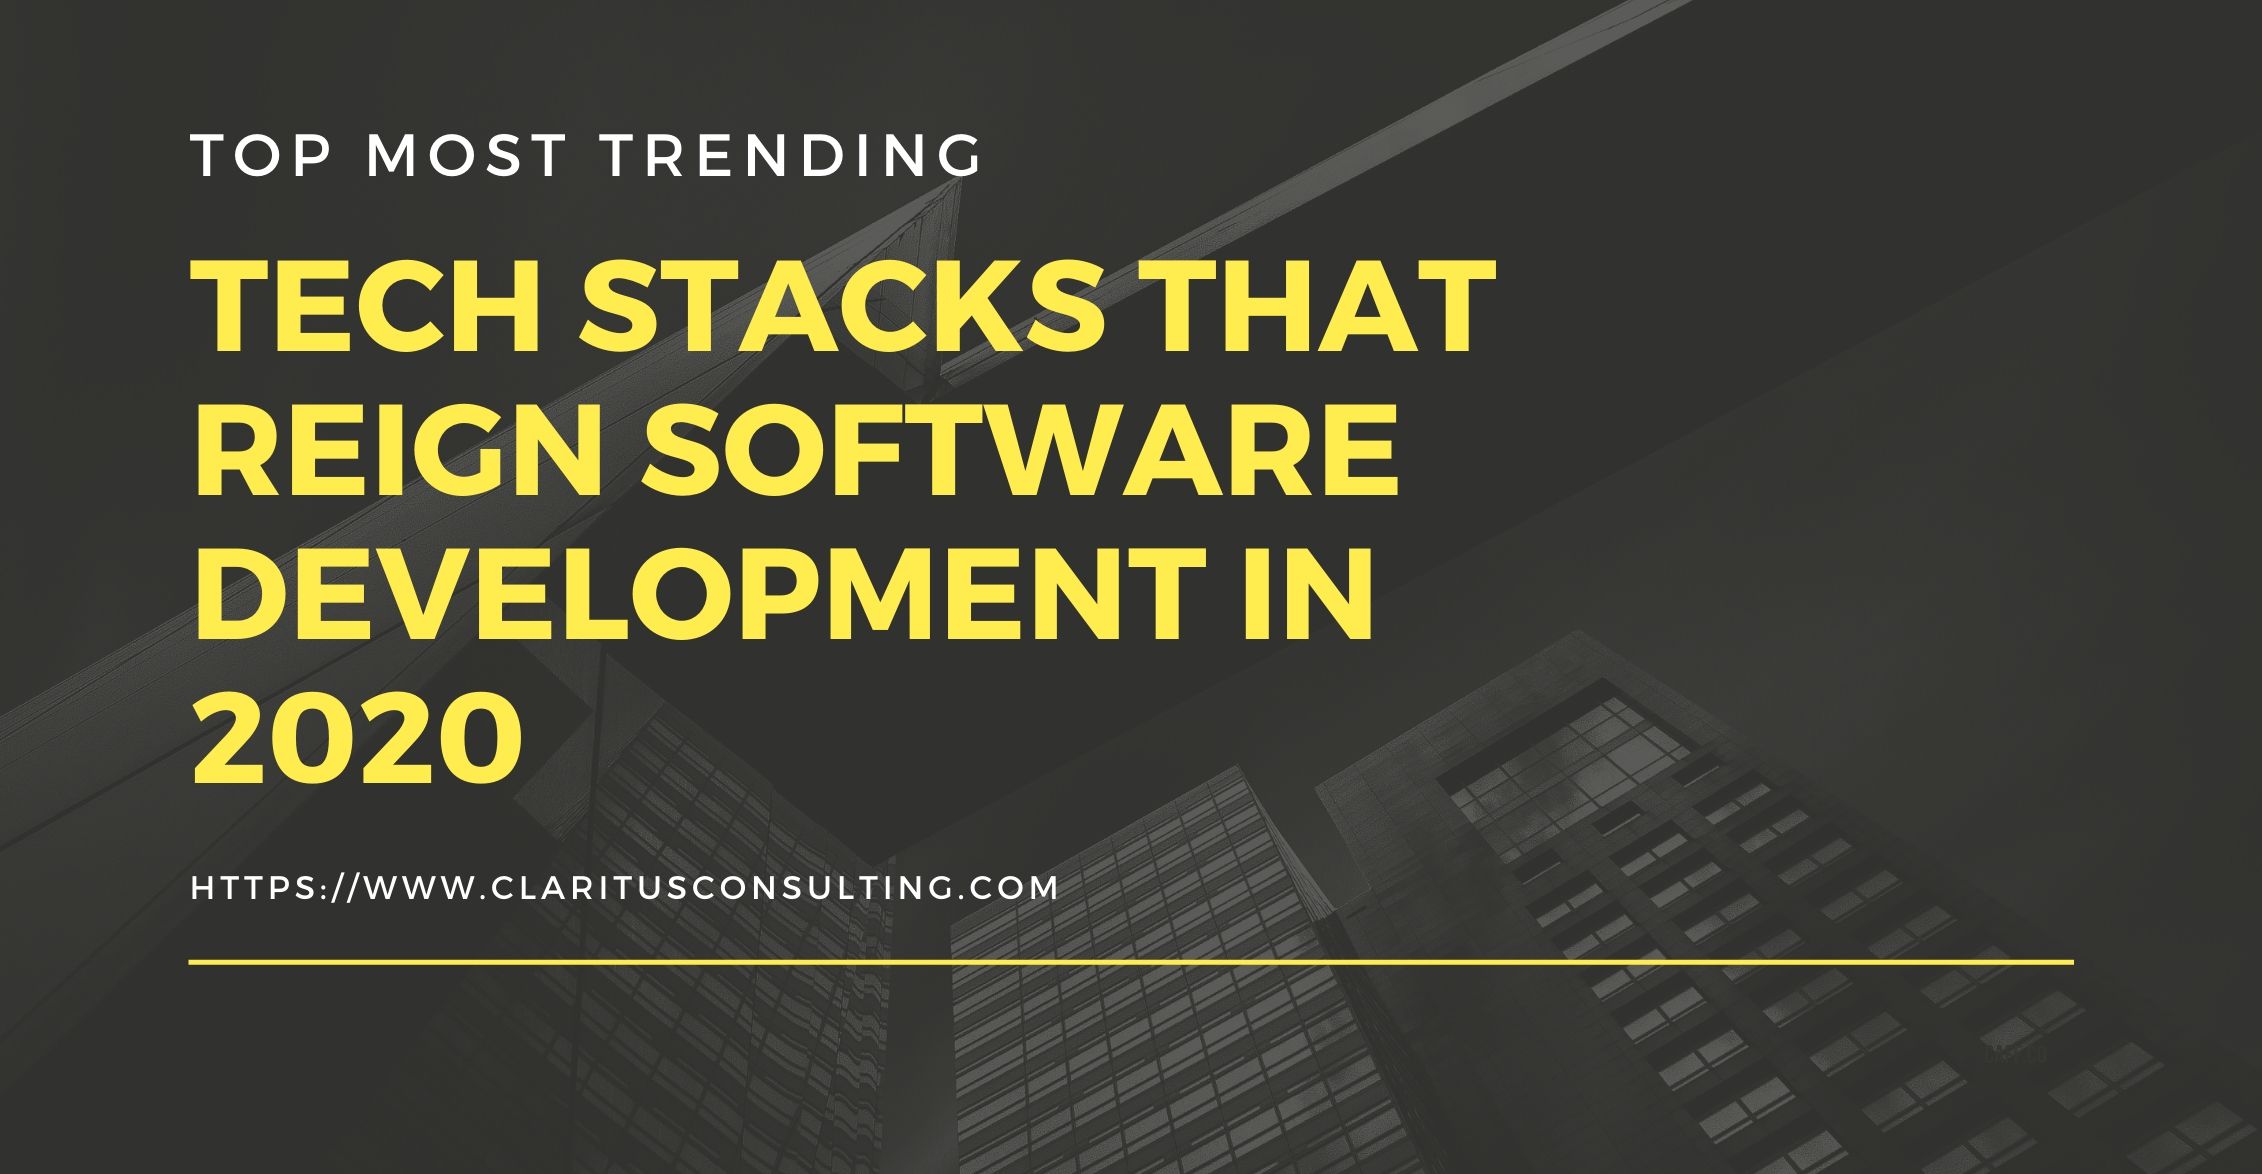 Top Most Trending Tech Stacks That Reign Software Development In 2020